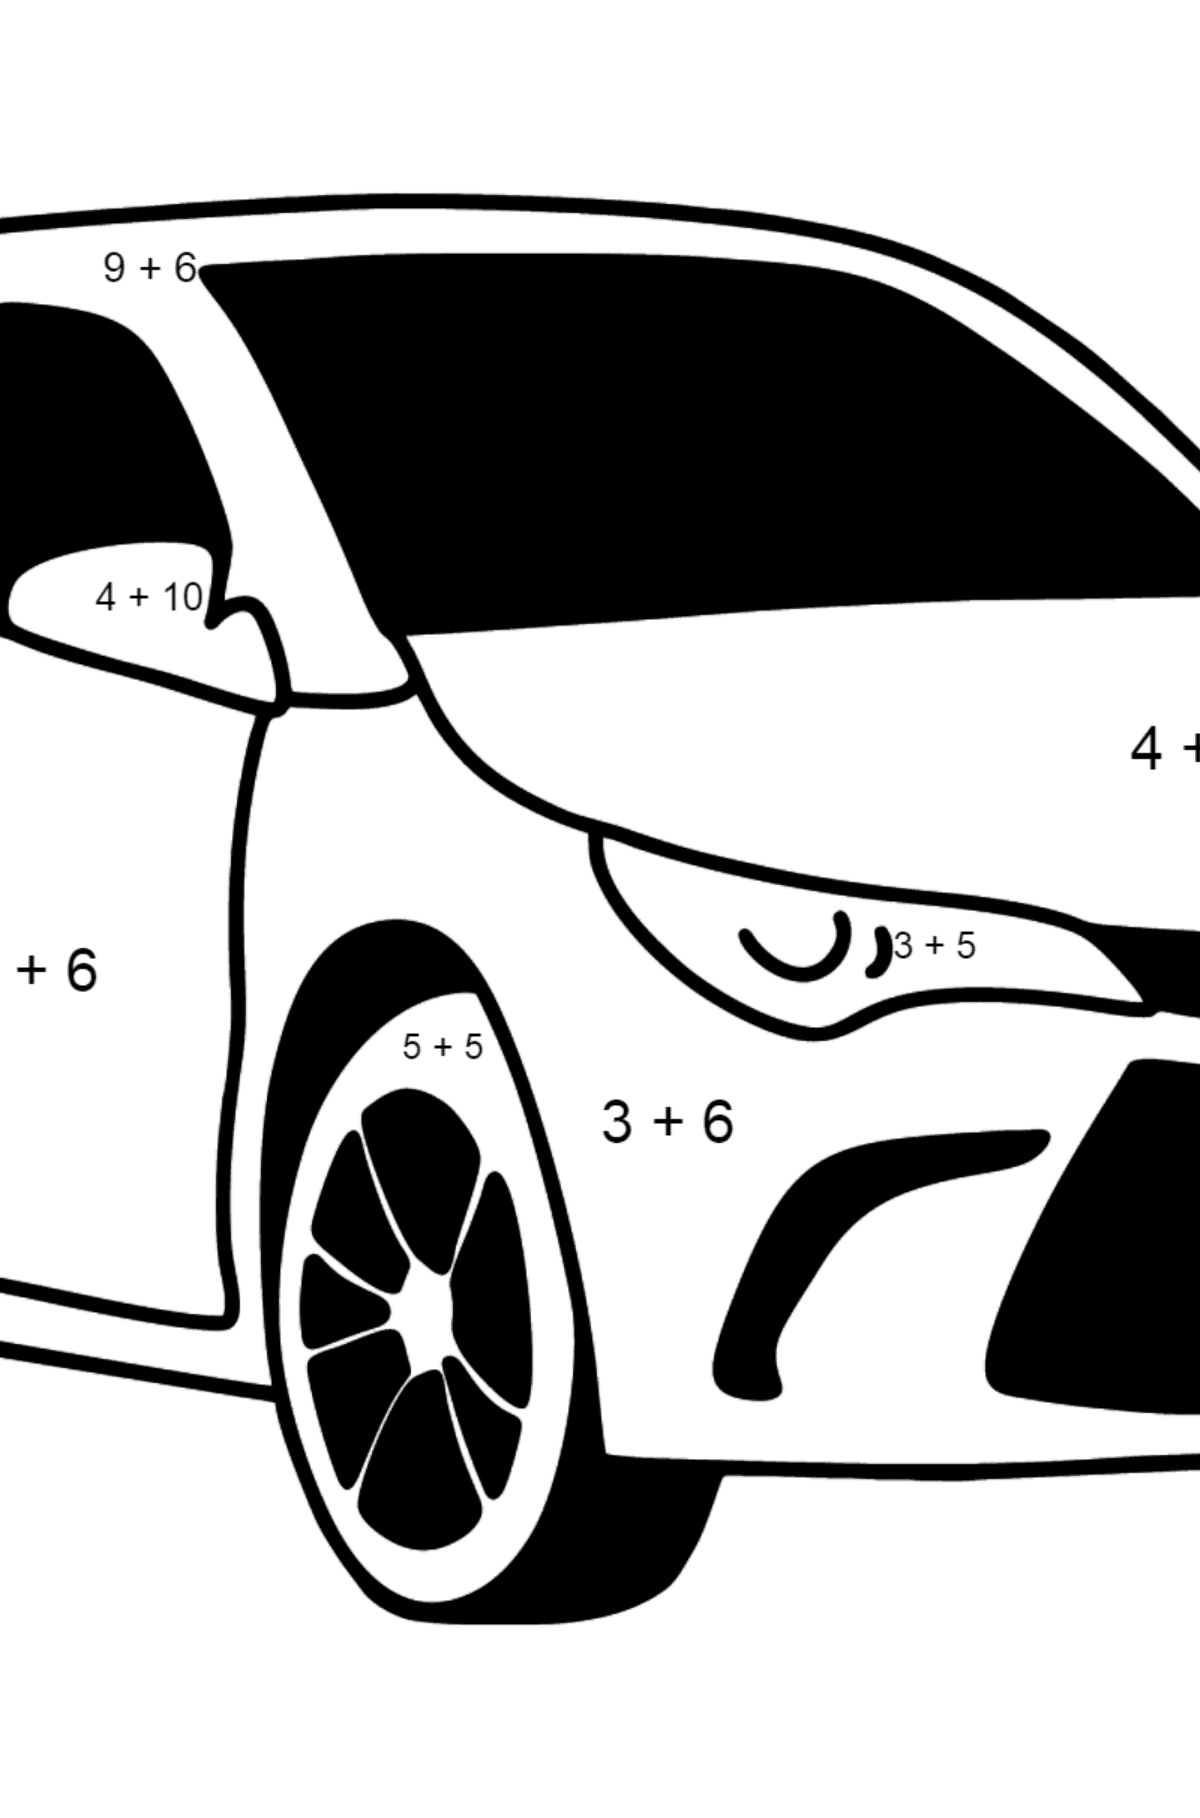 Toyota Camry coloring page - Math Coloring - Addition for Kids